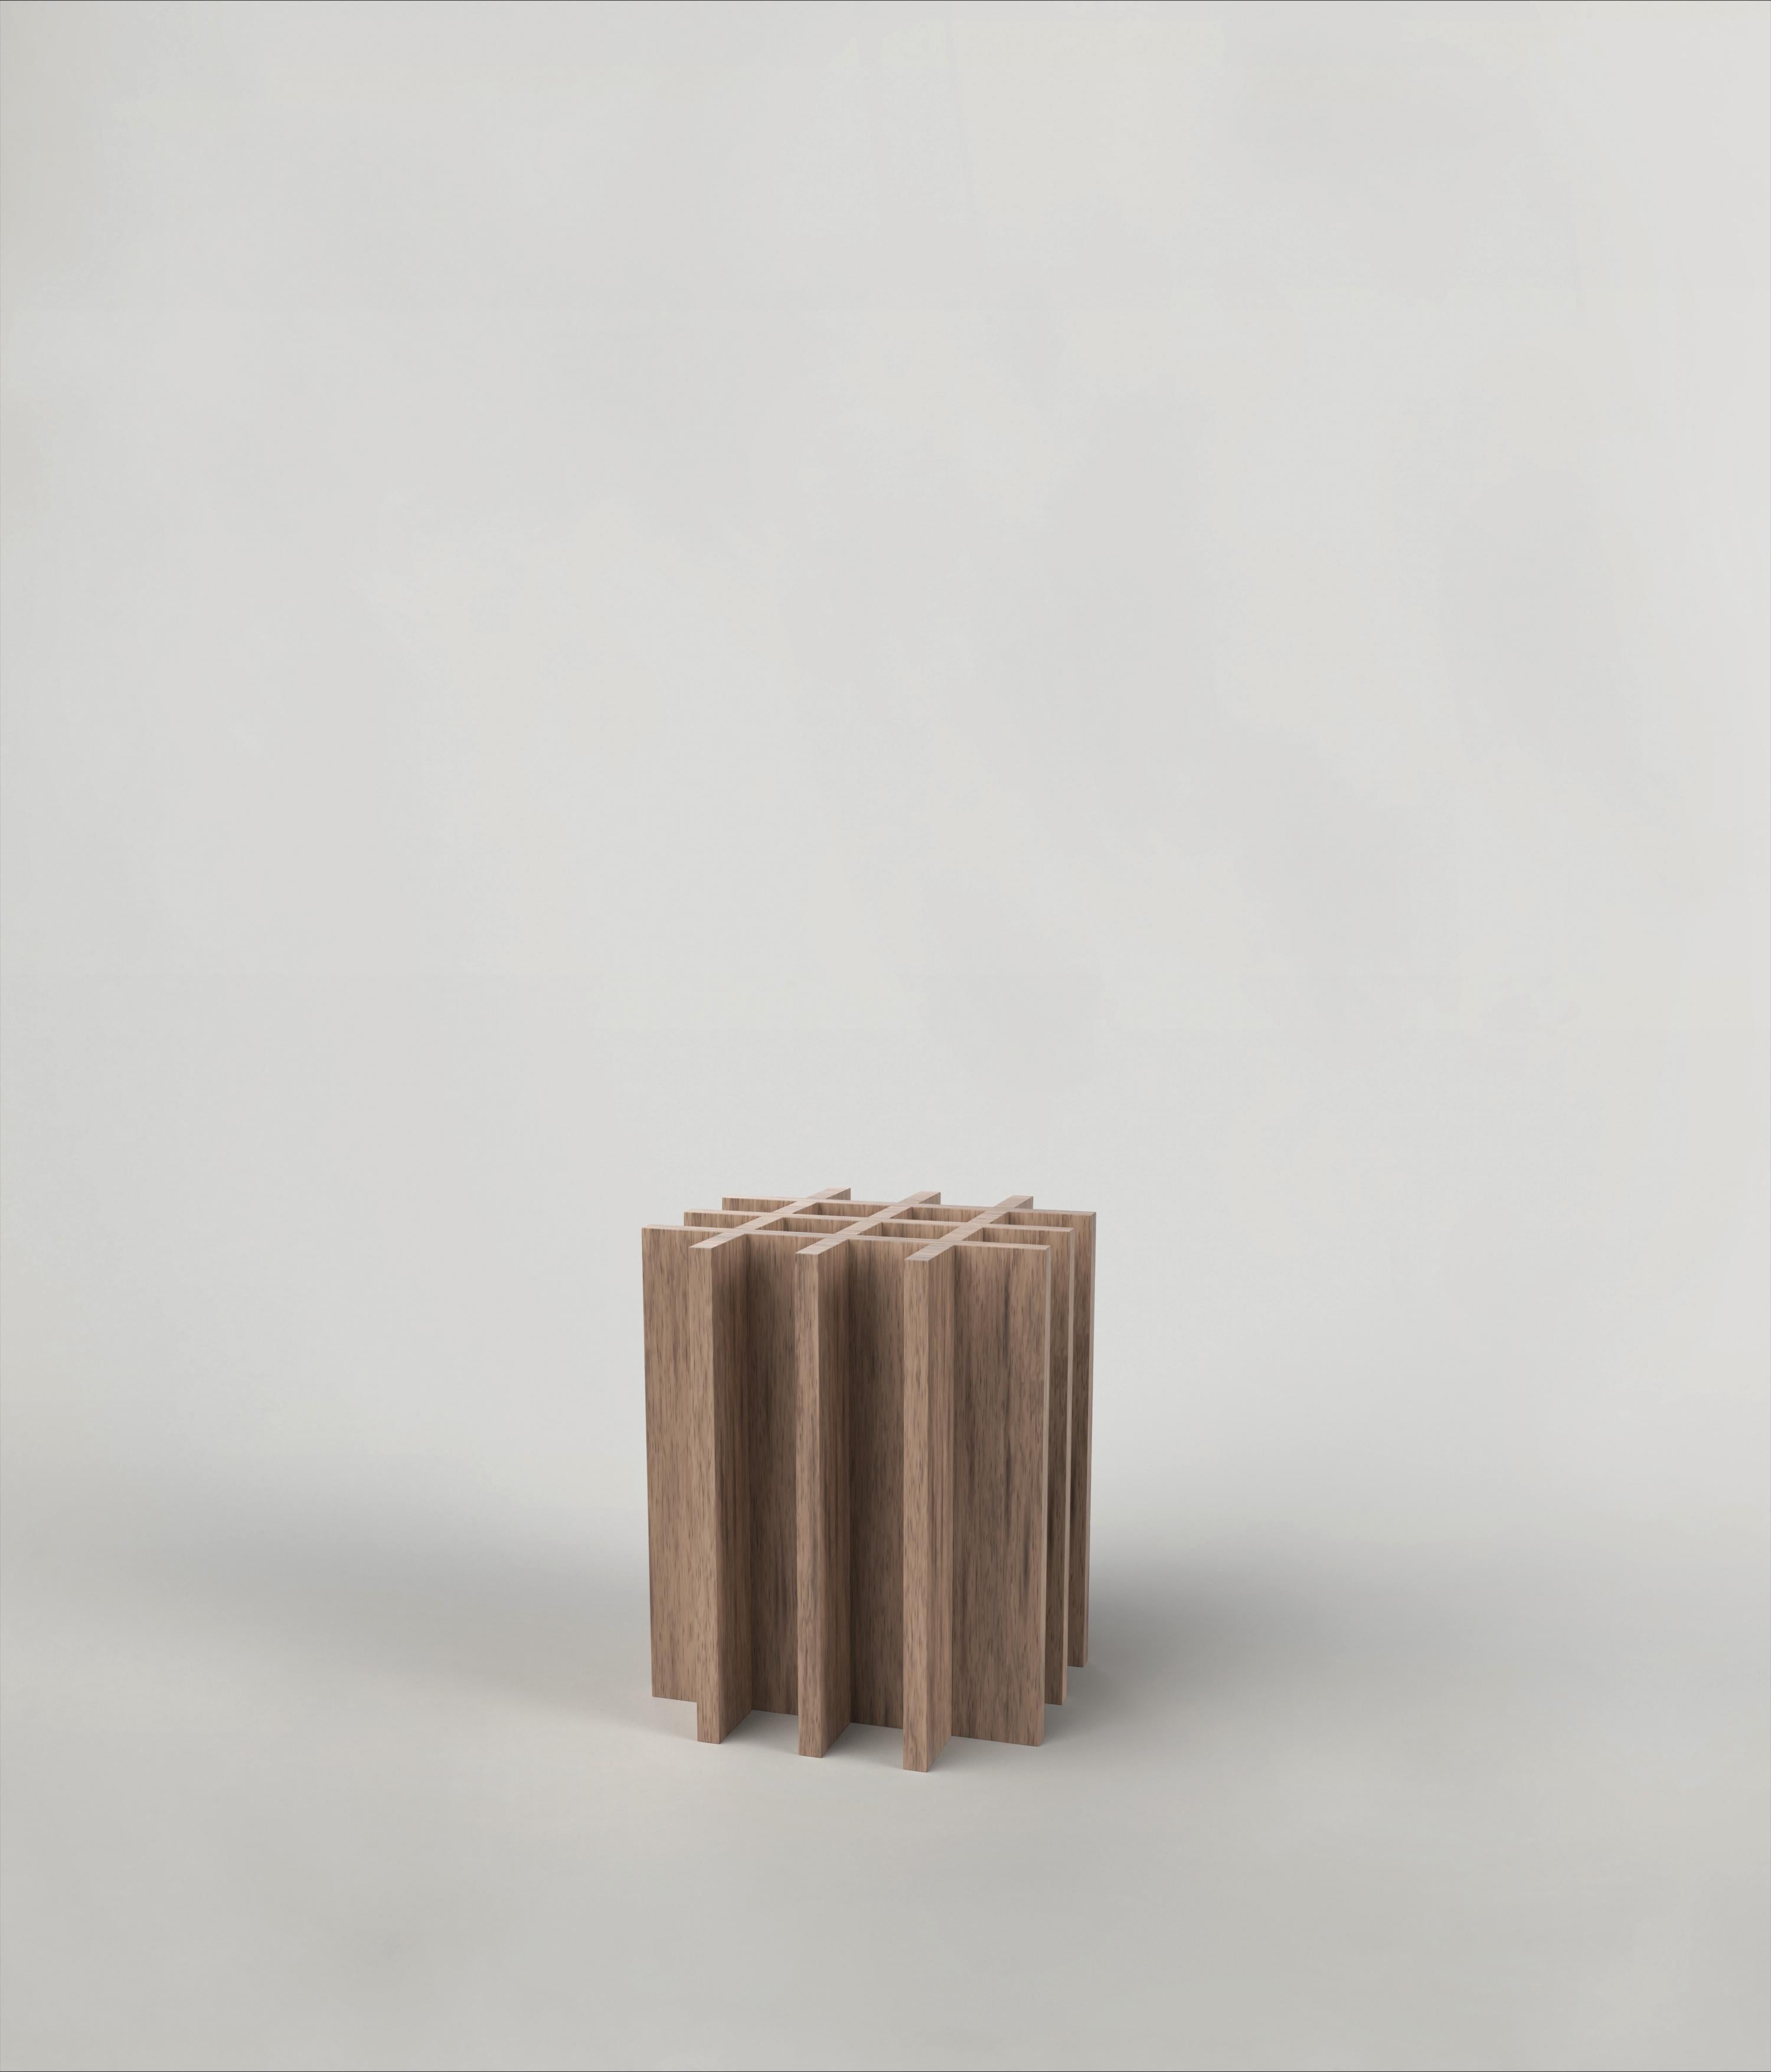 Arca V1 stool by Edizione Limitata
Limited edition of 150. Signed and numbered.
Dimensions: D 35 x W 35 x H 42 cm
Materials: solid ash wood

These contemporary solid wood pieces are manufactured by the excellence of Italian craftmanship. It is